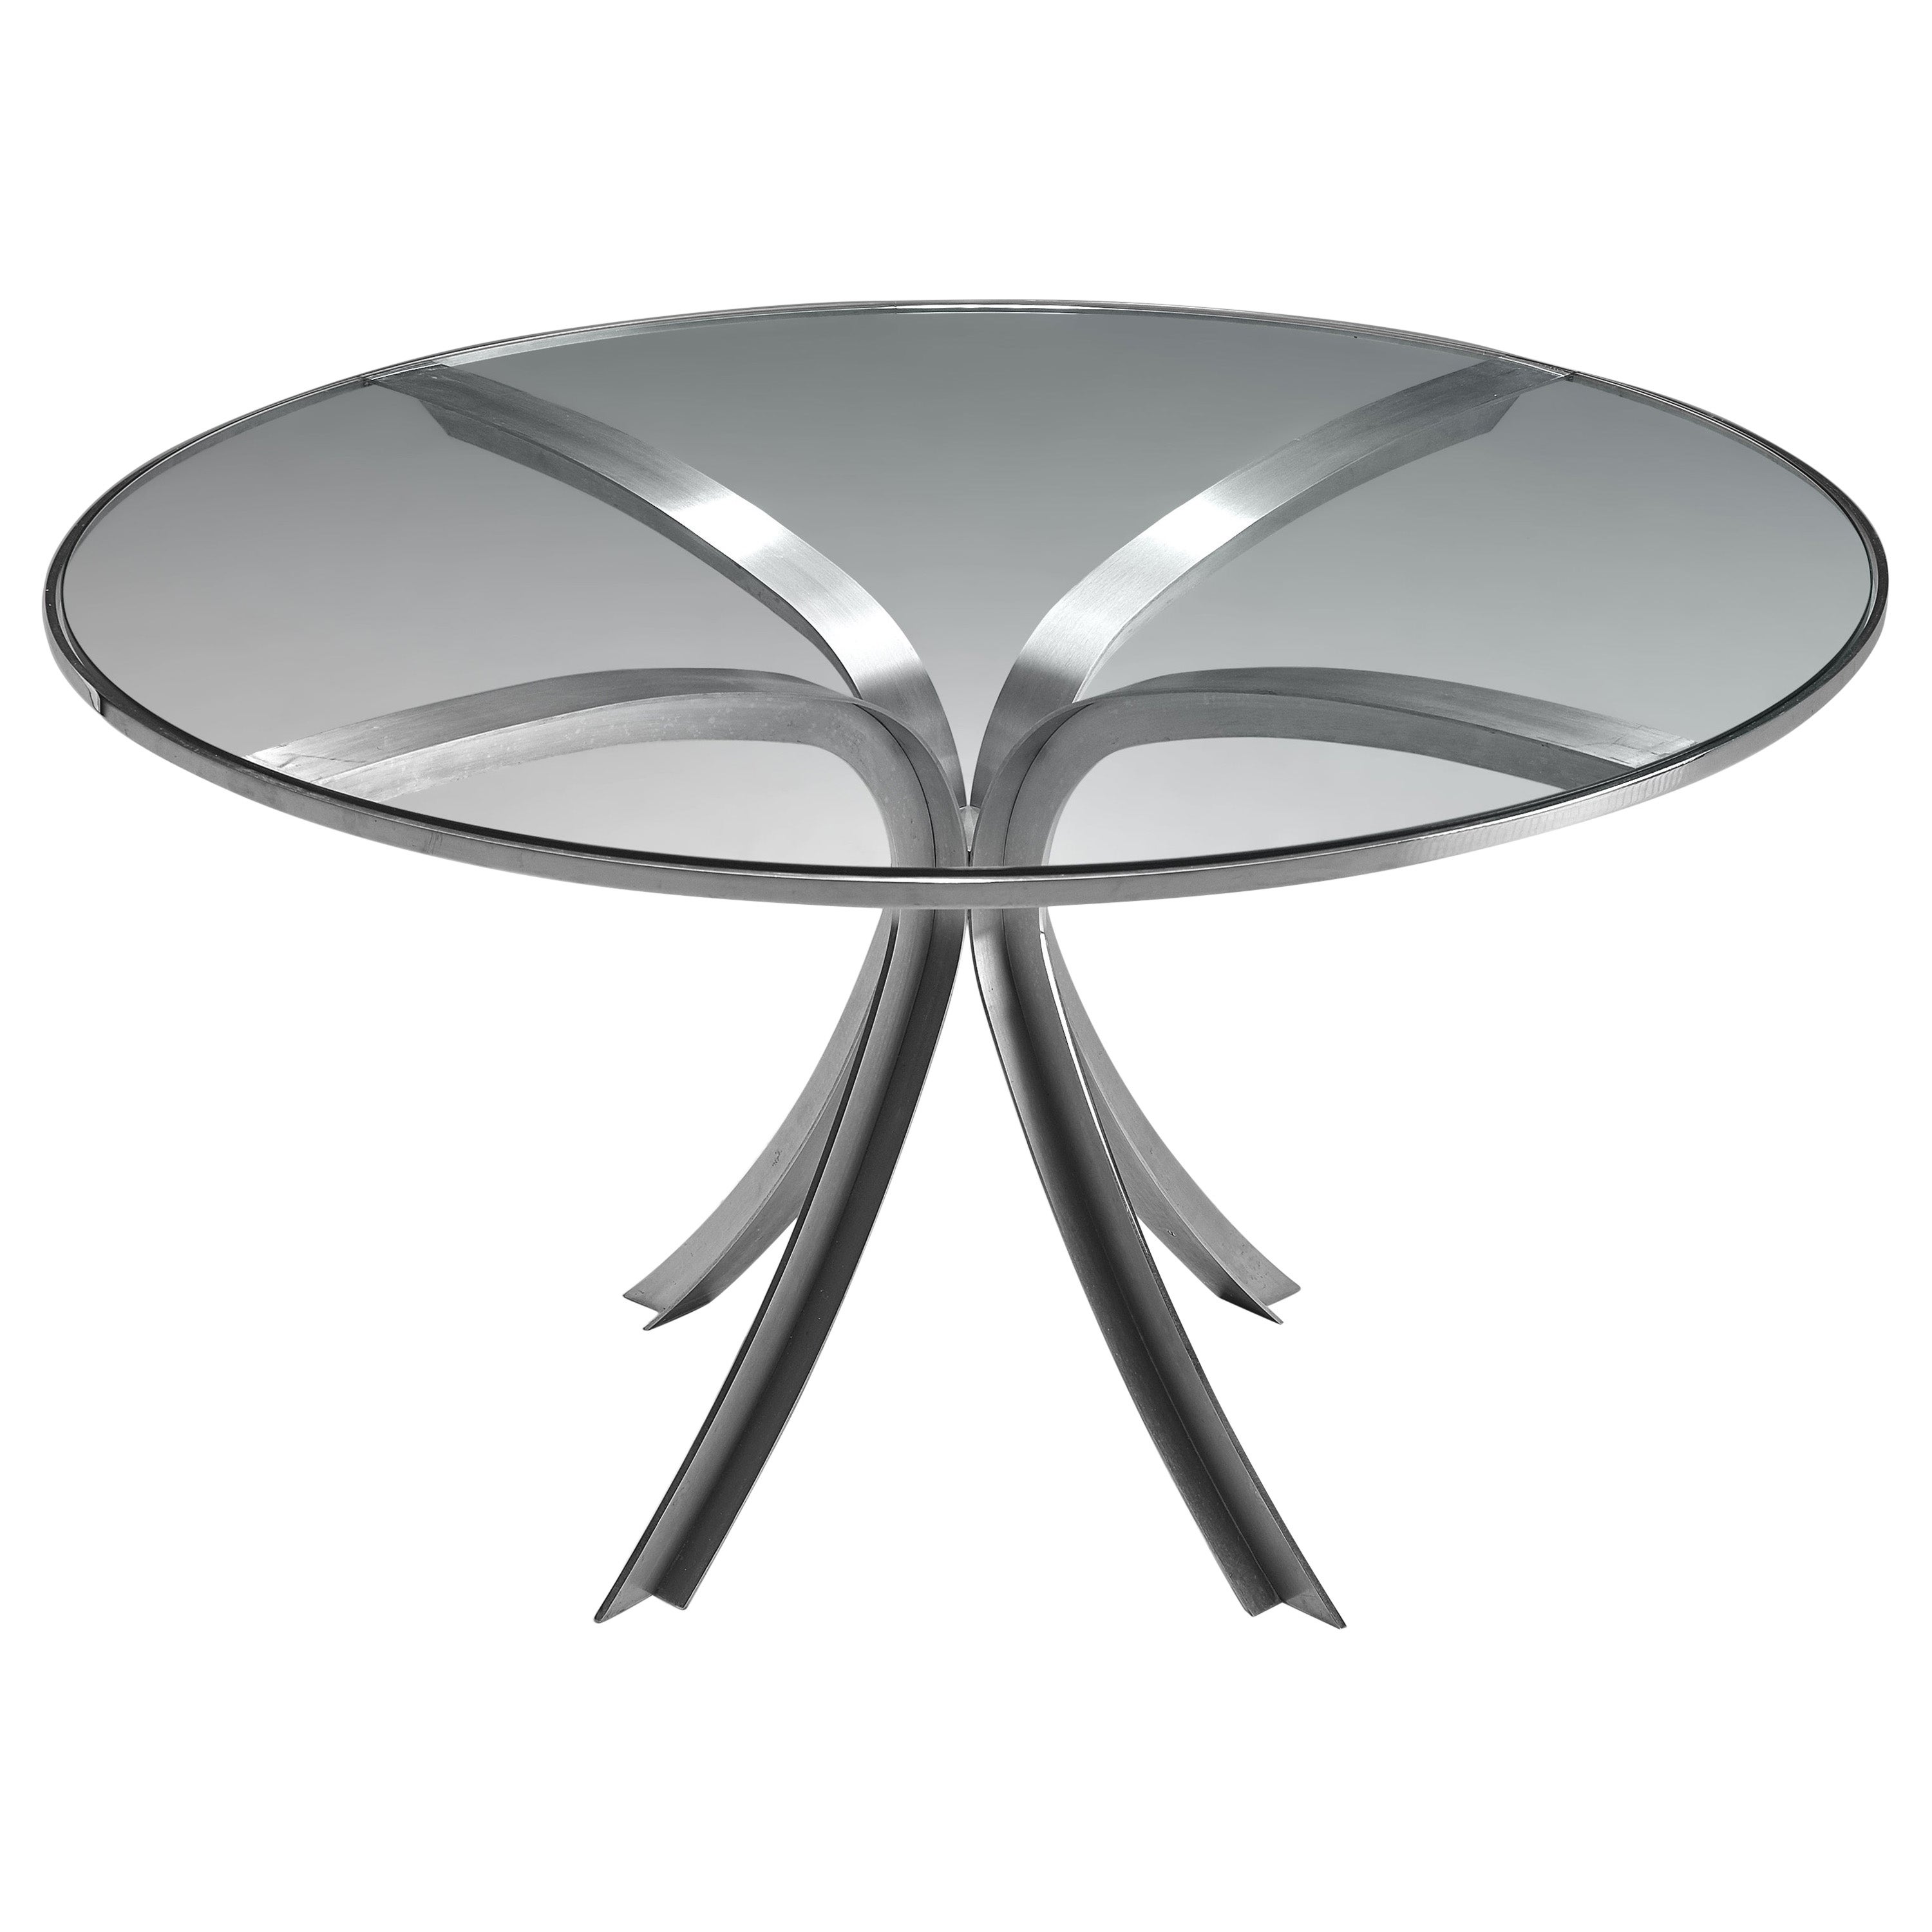 Xavier Féal Table in Glass and Steel